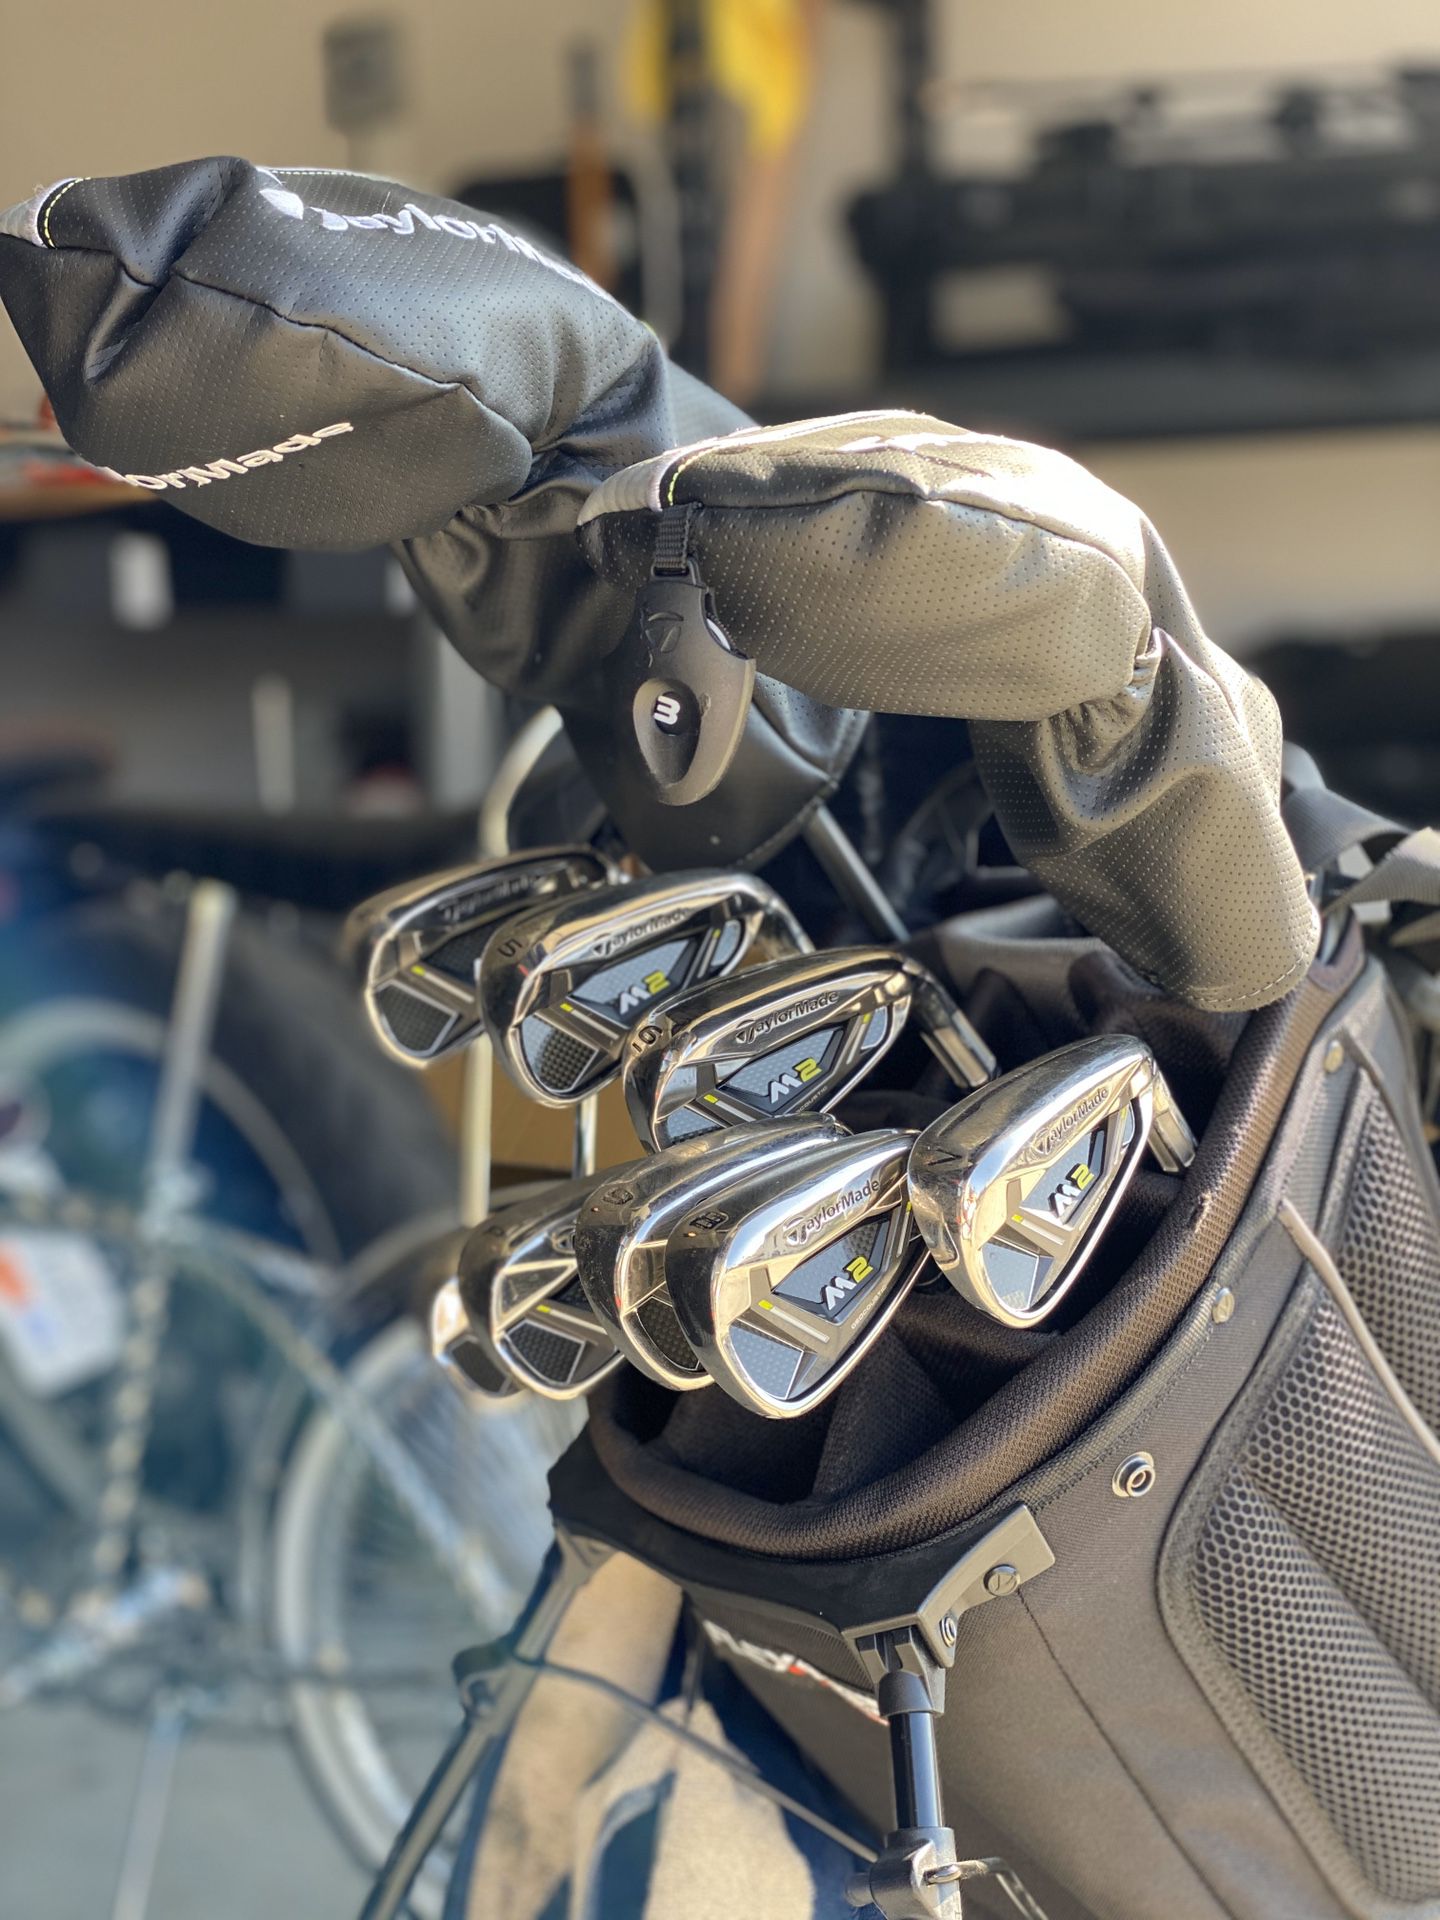 Taylor Made M2 Golf Clubs